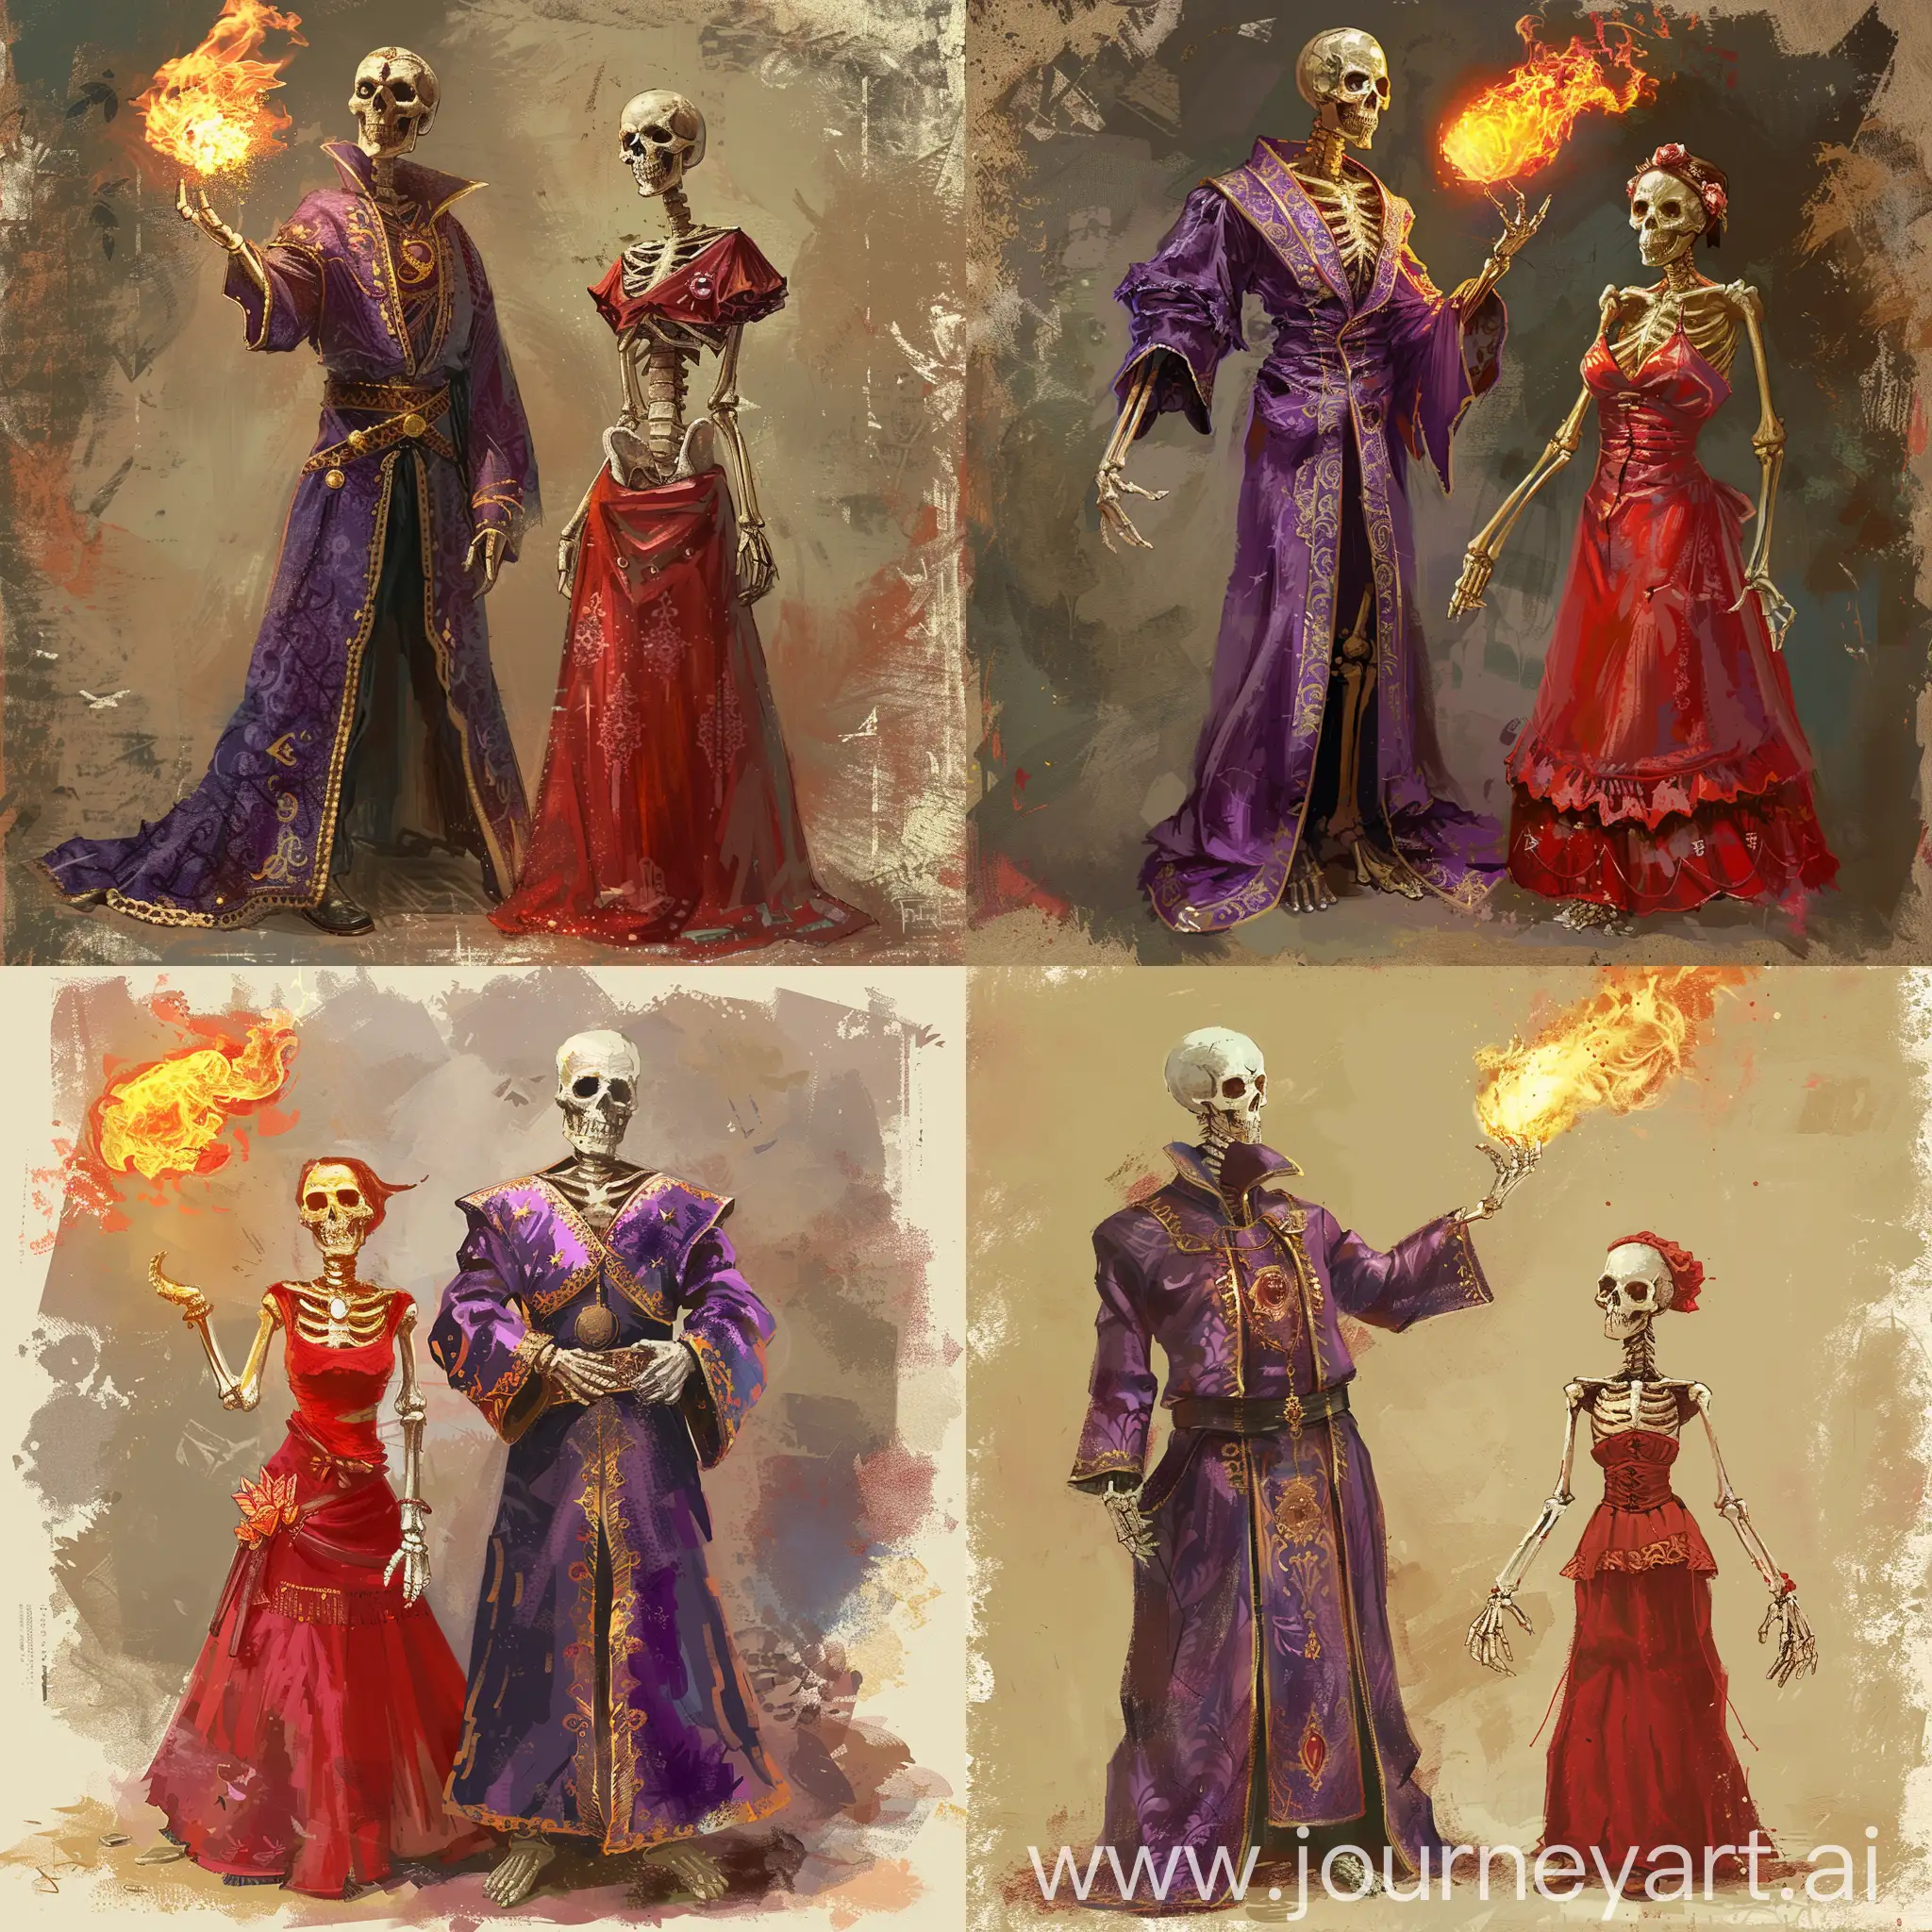 Skeleton-Mage-Casting-Fireball-with-Skeleton-Maid-Dungeons-and-Dragons-Portrait